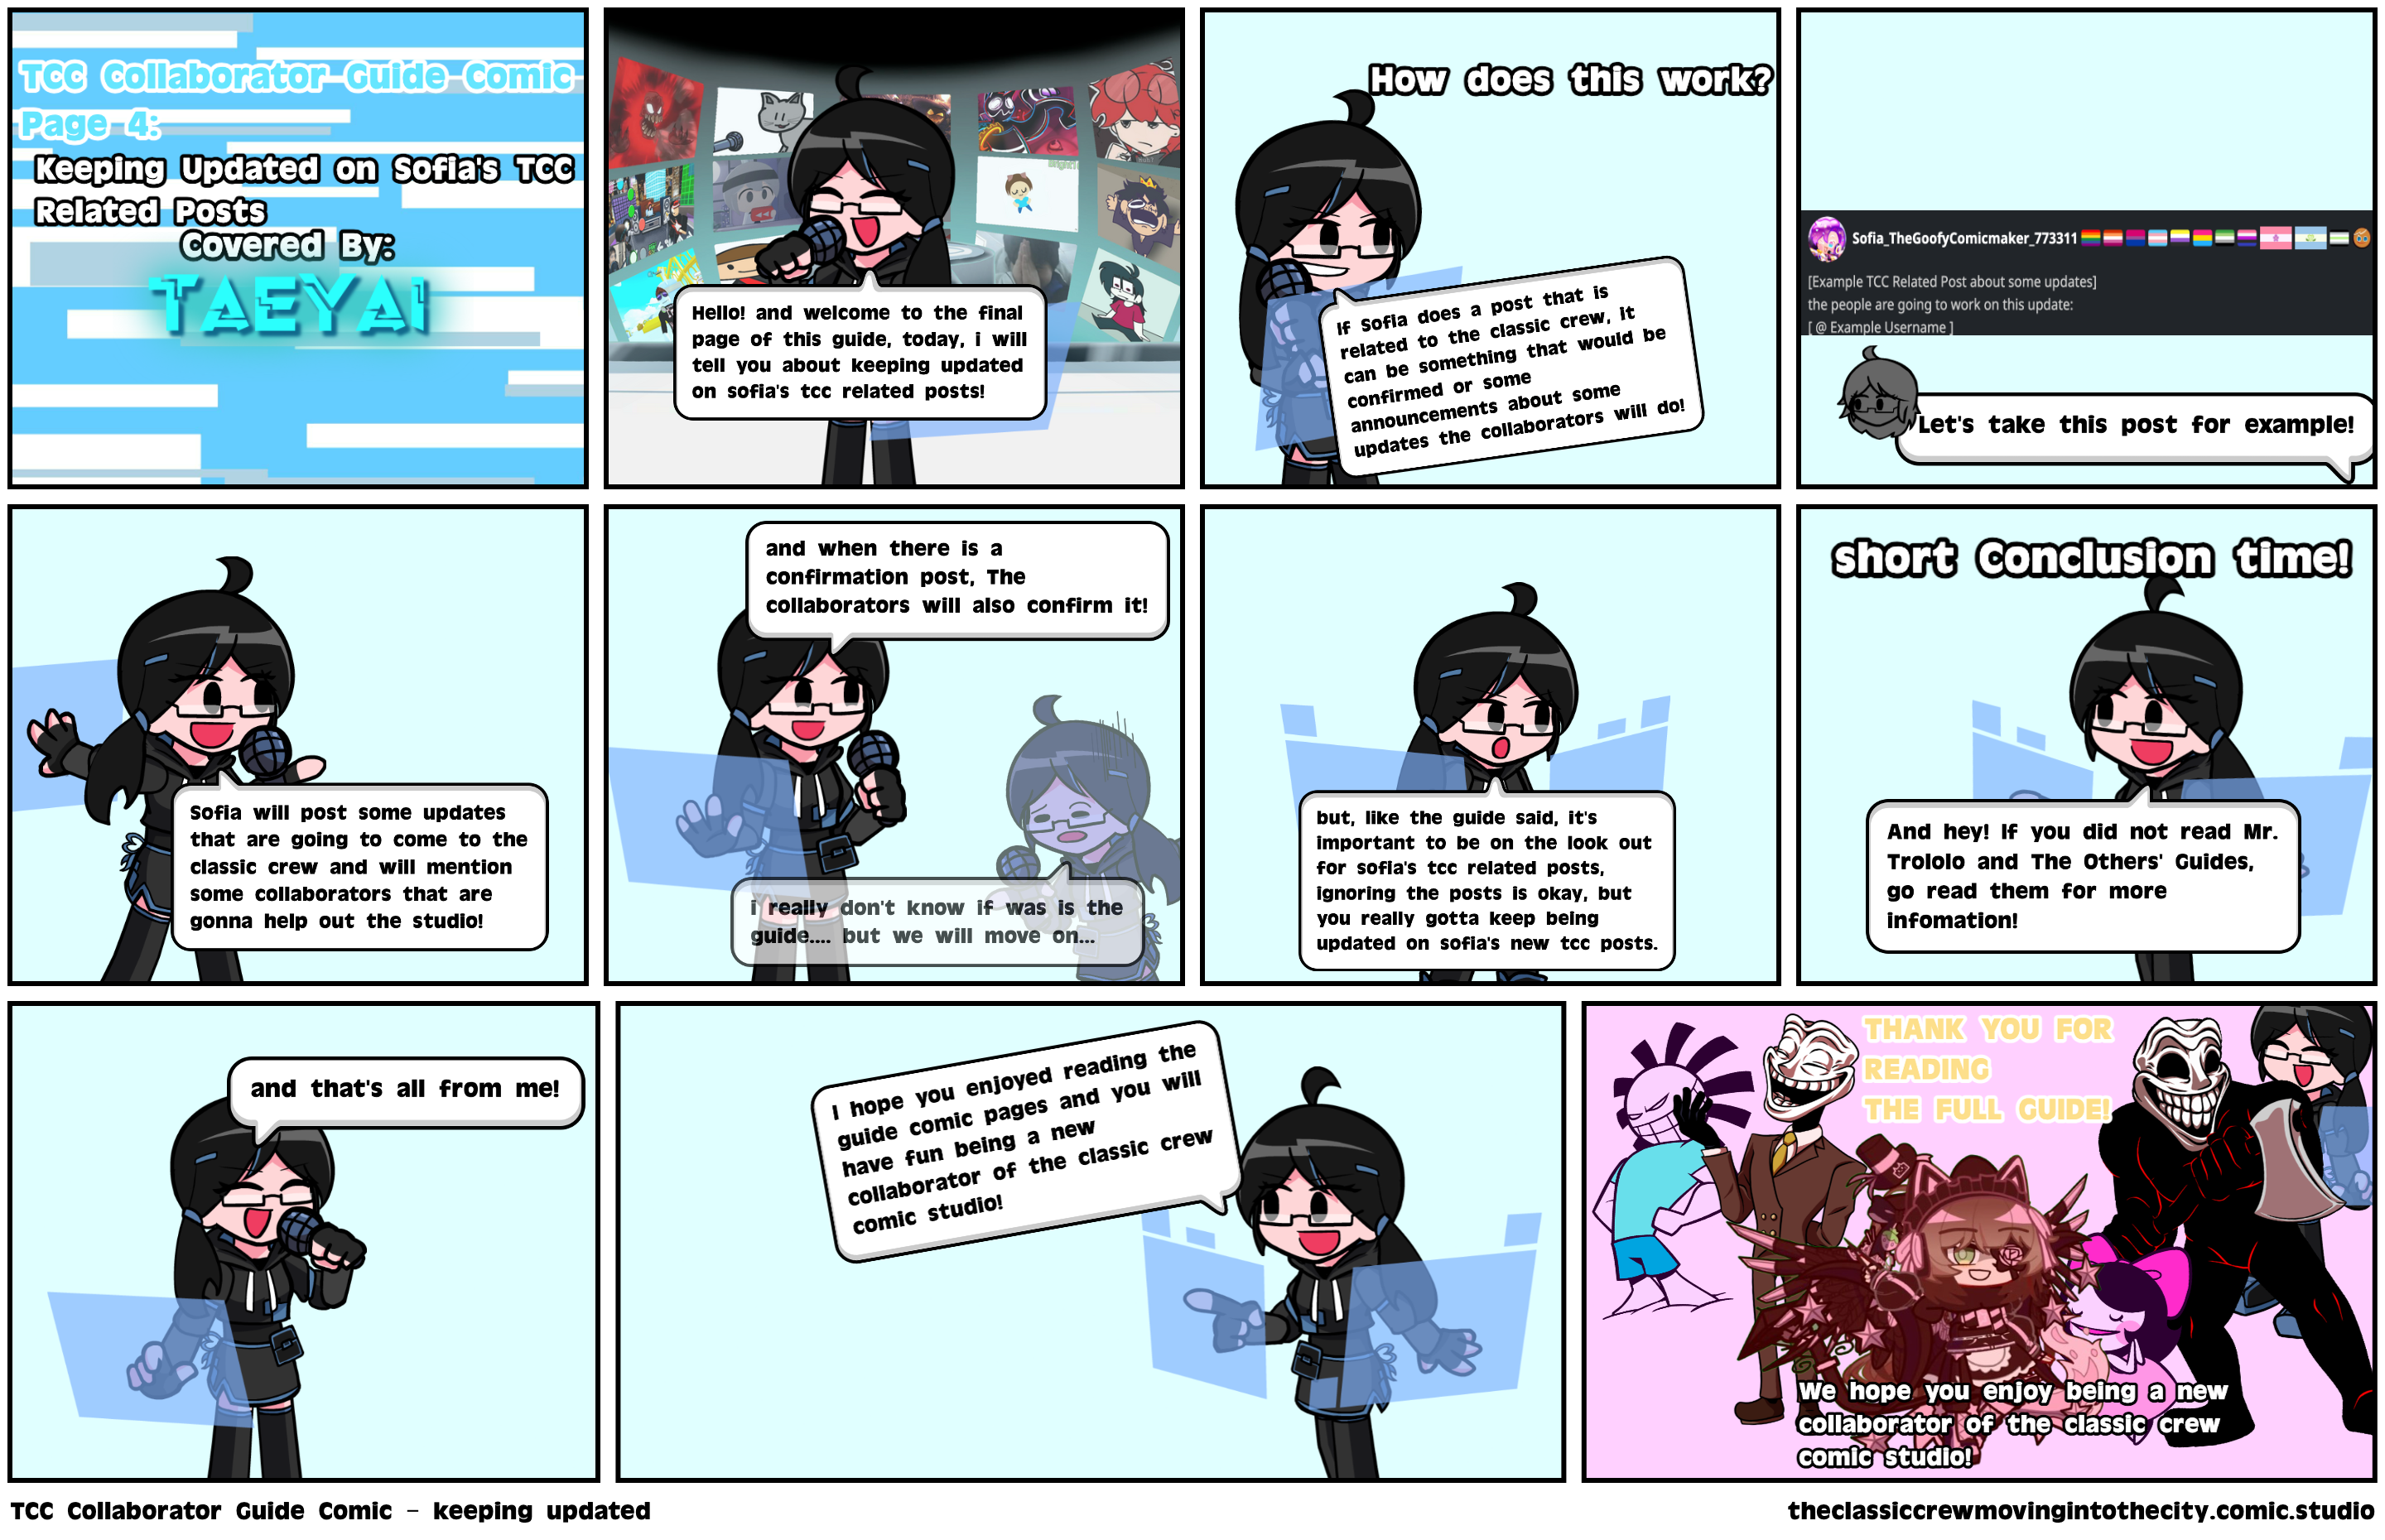 TCC Collaborator Guide Comic - keeping updated